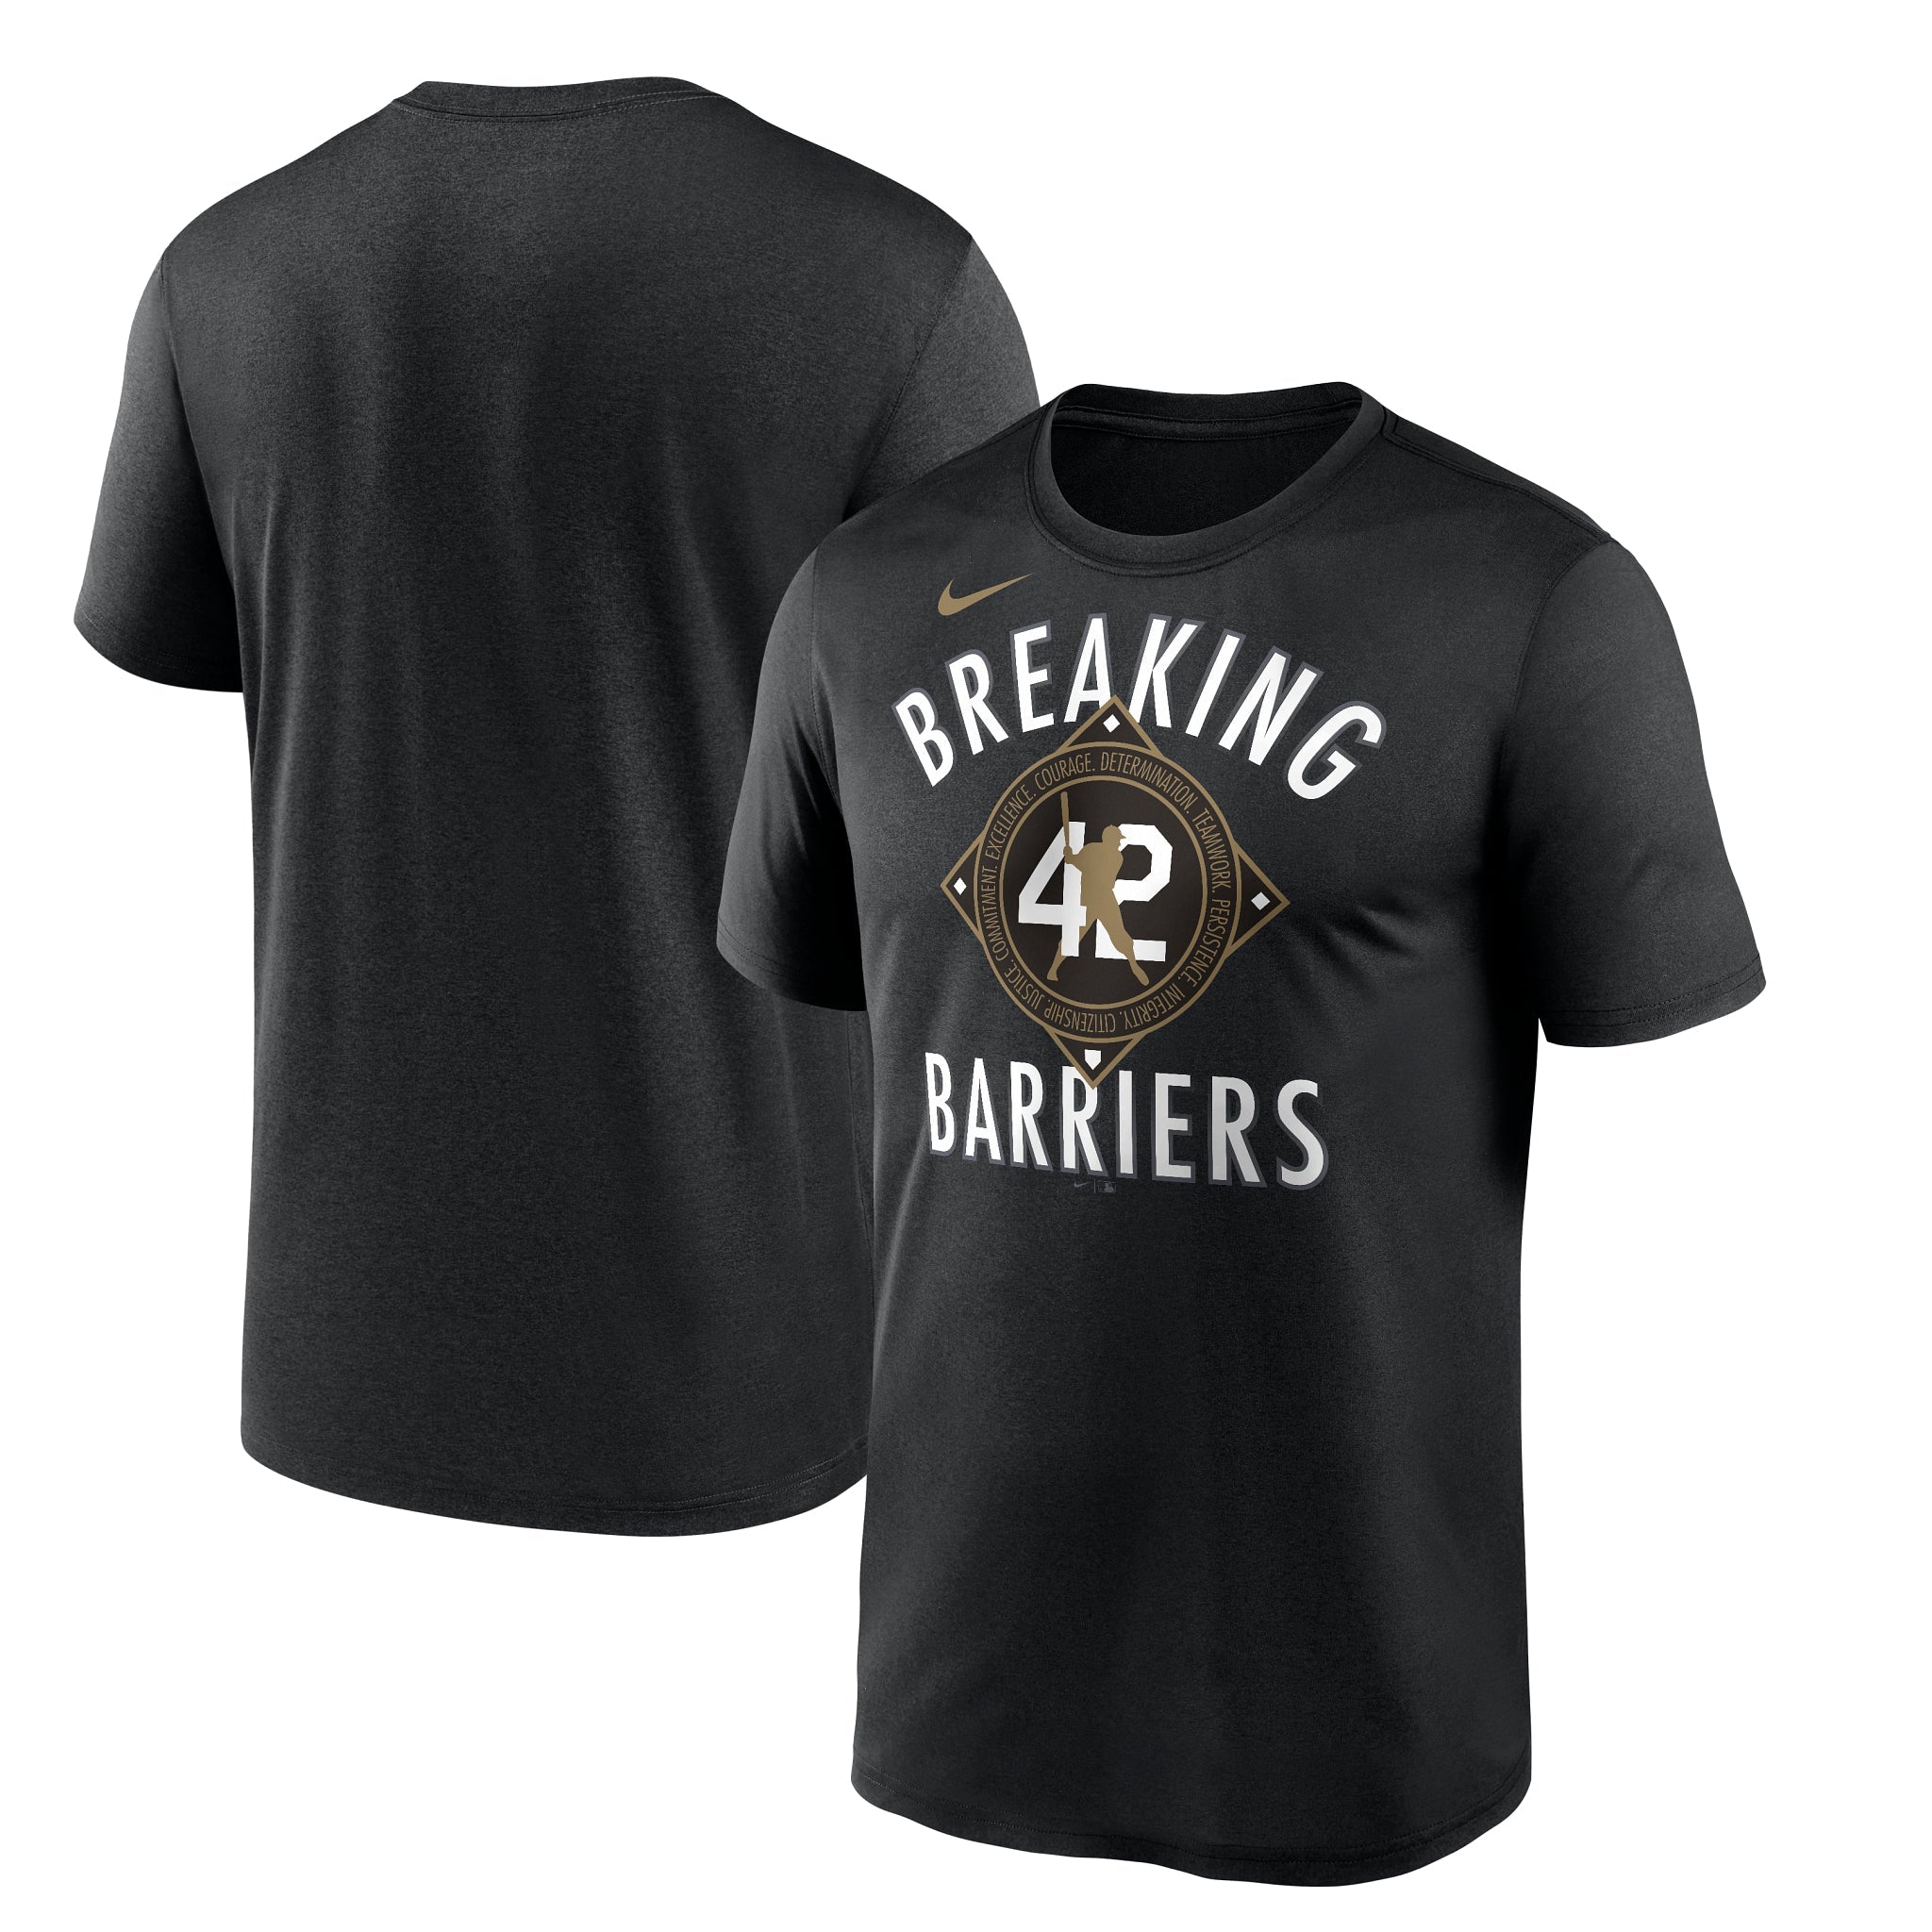 NEW Nike Men's MLB Jackie Robinson Breaking Barriers T-Shirt Size MED